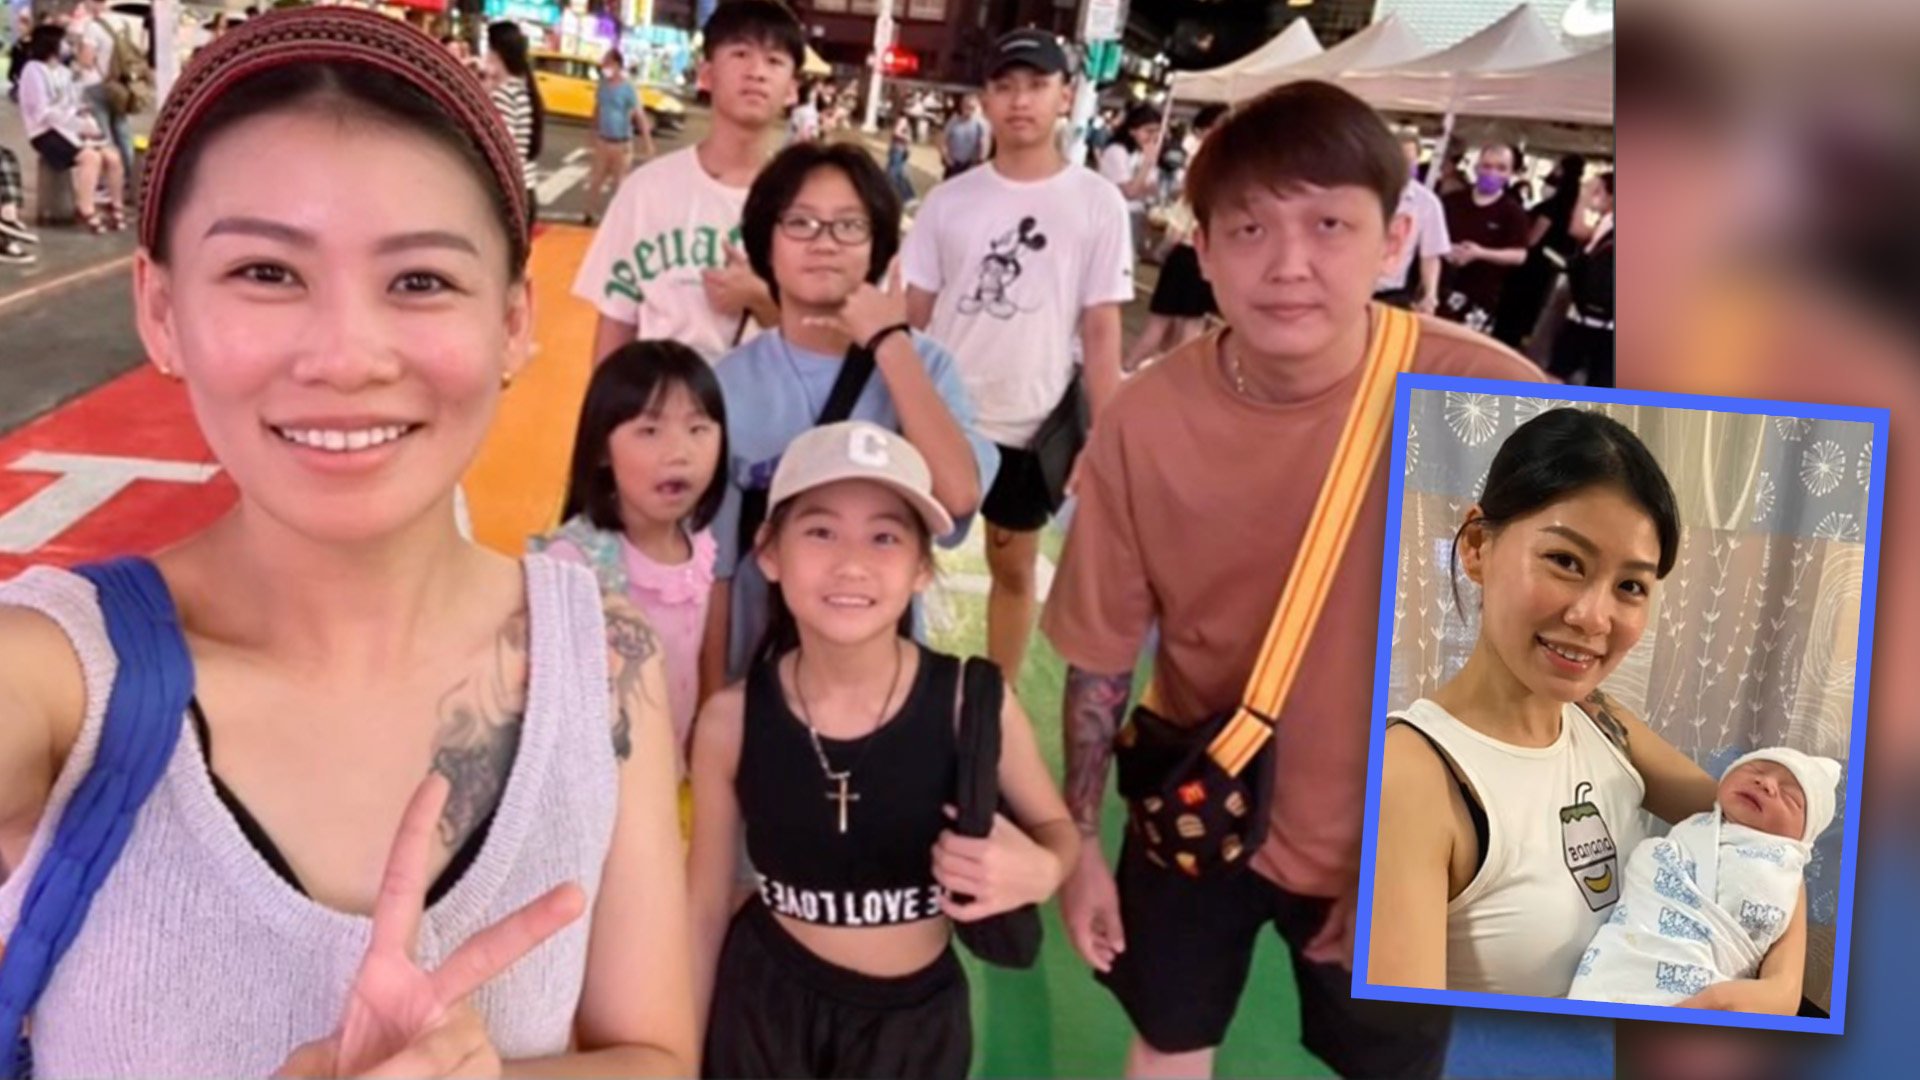 A mother-of-five influencer from Singapore, who has become a grandmother at the age of 34, says she will “support and guide” her 17-year-old son, the new father. Photo: SCMP composite